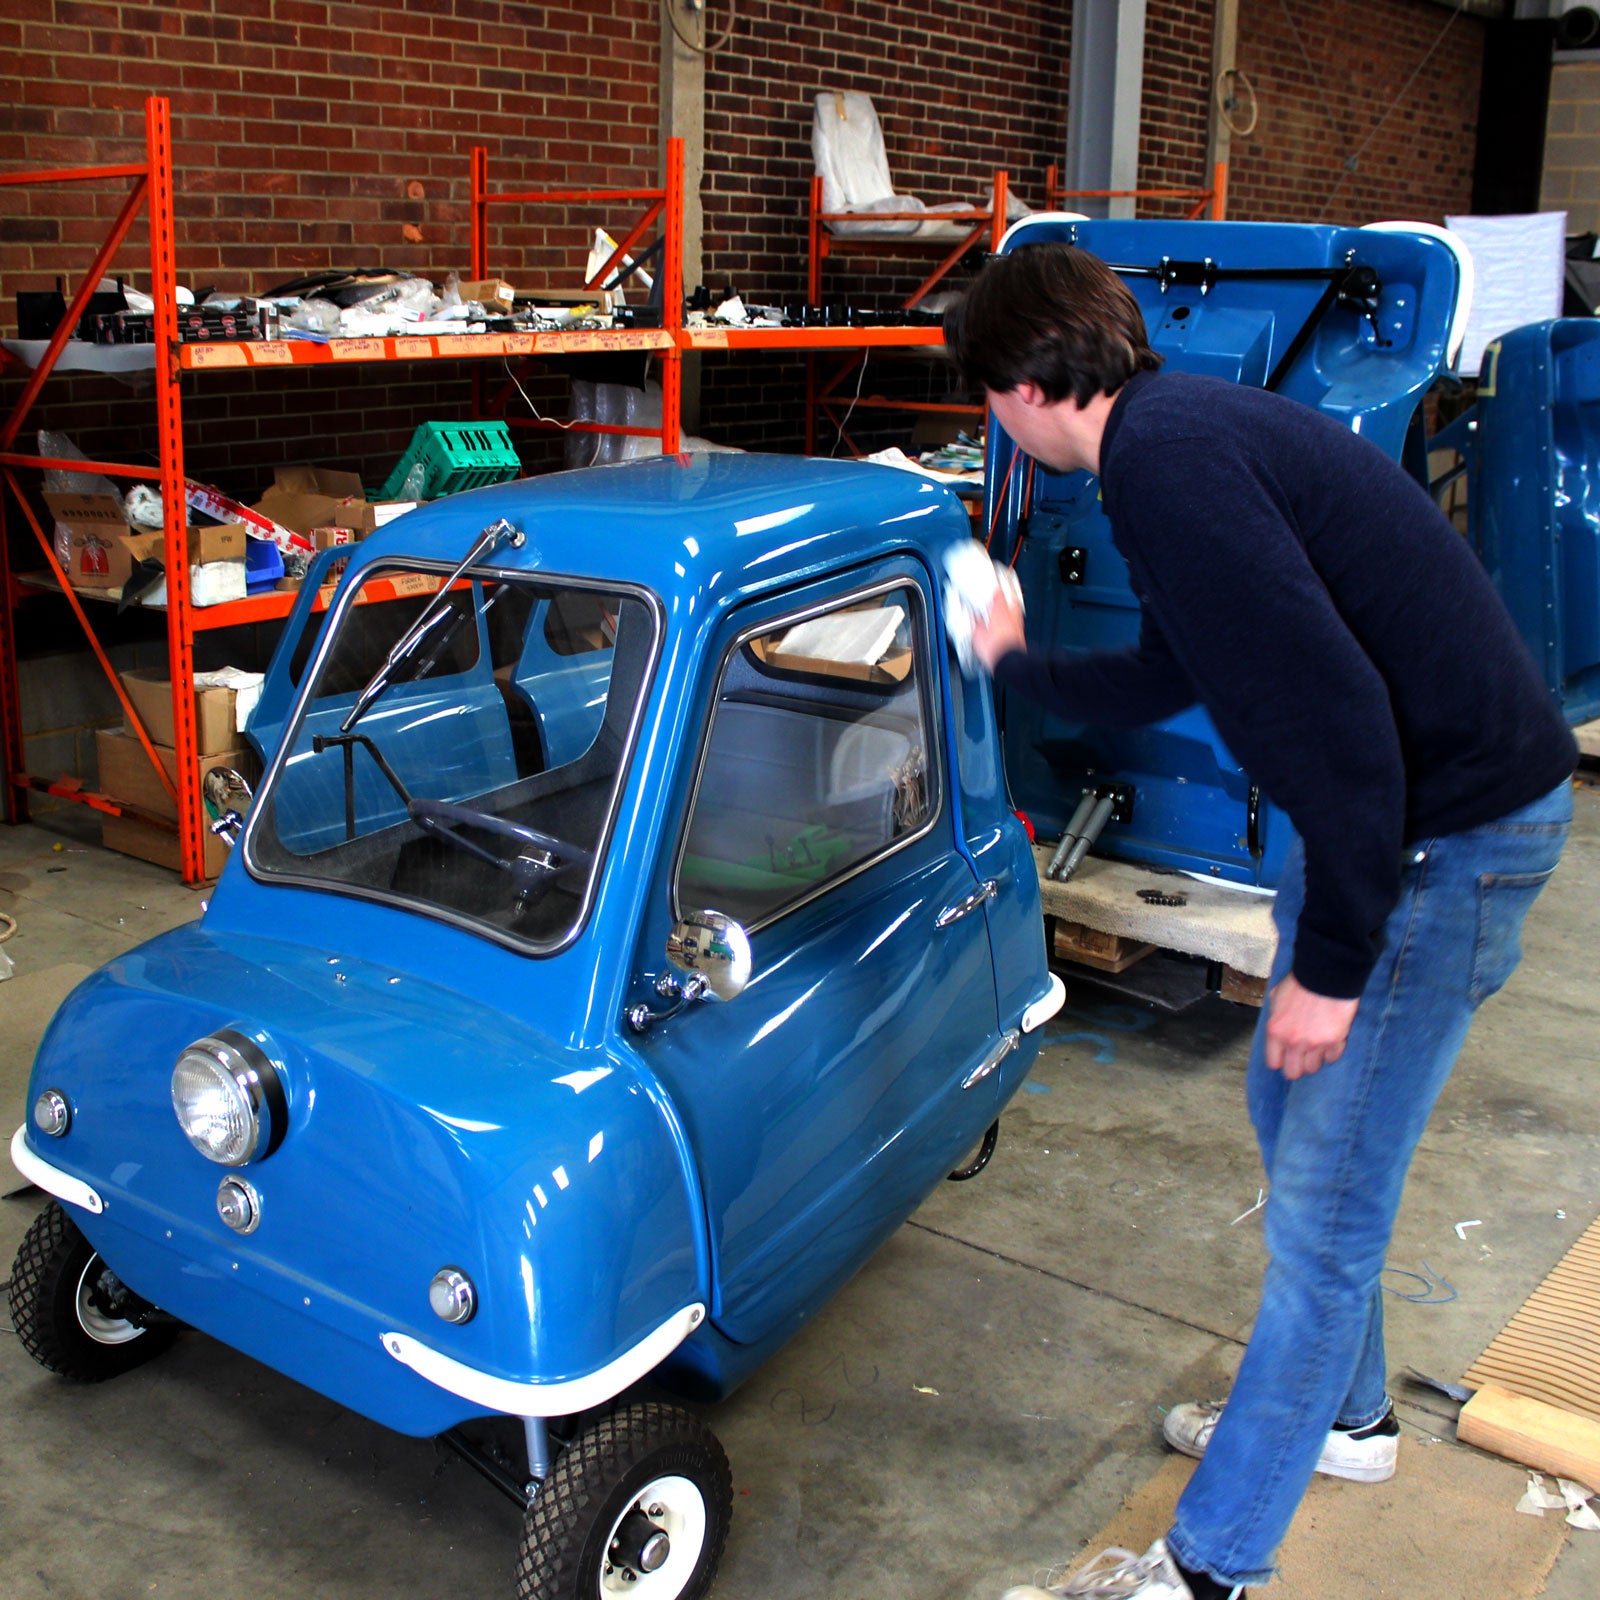 This Company Builds Brand-New Replicas of the Peel P50, The World’s Smallest Car